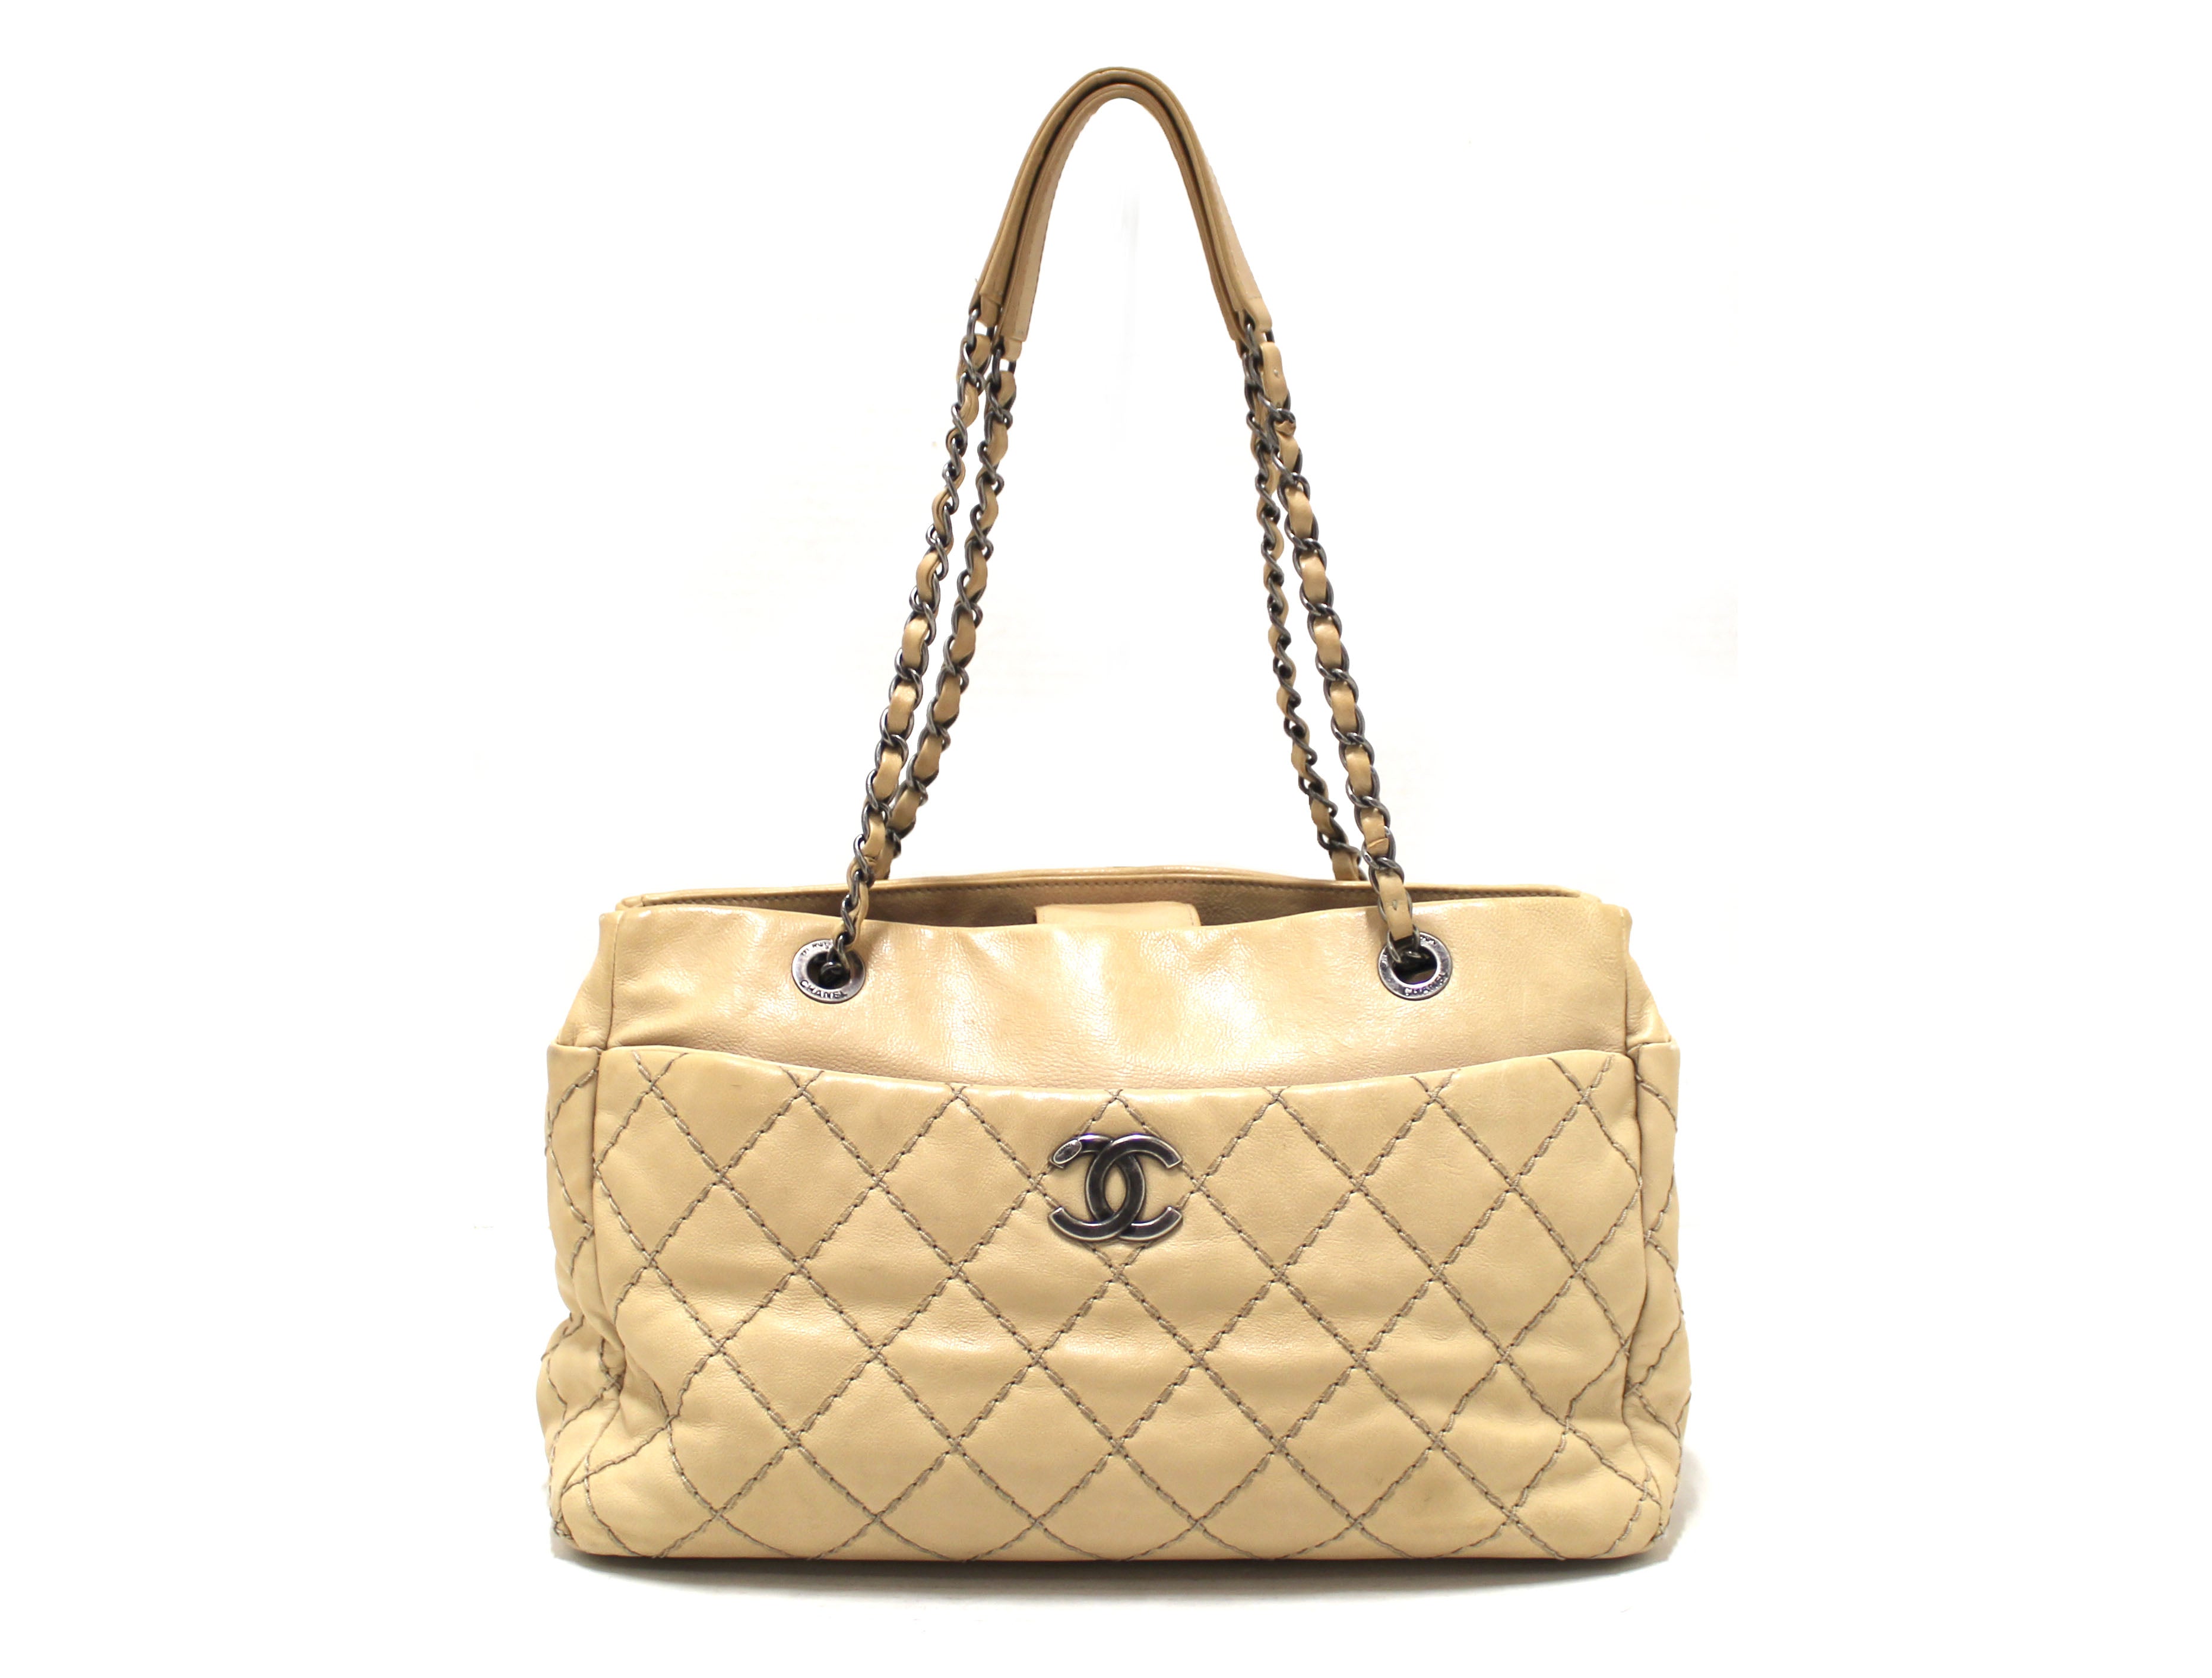 Authentic Chanel 31 Rue Cambon Paris Beige Stitched Quilted